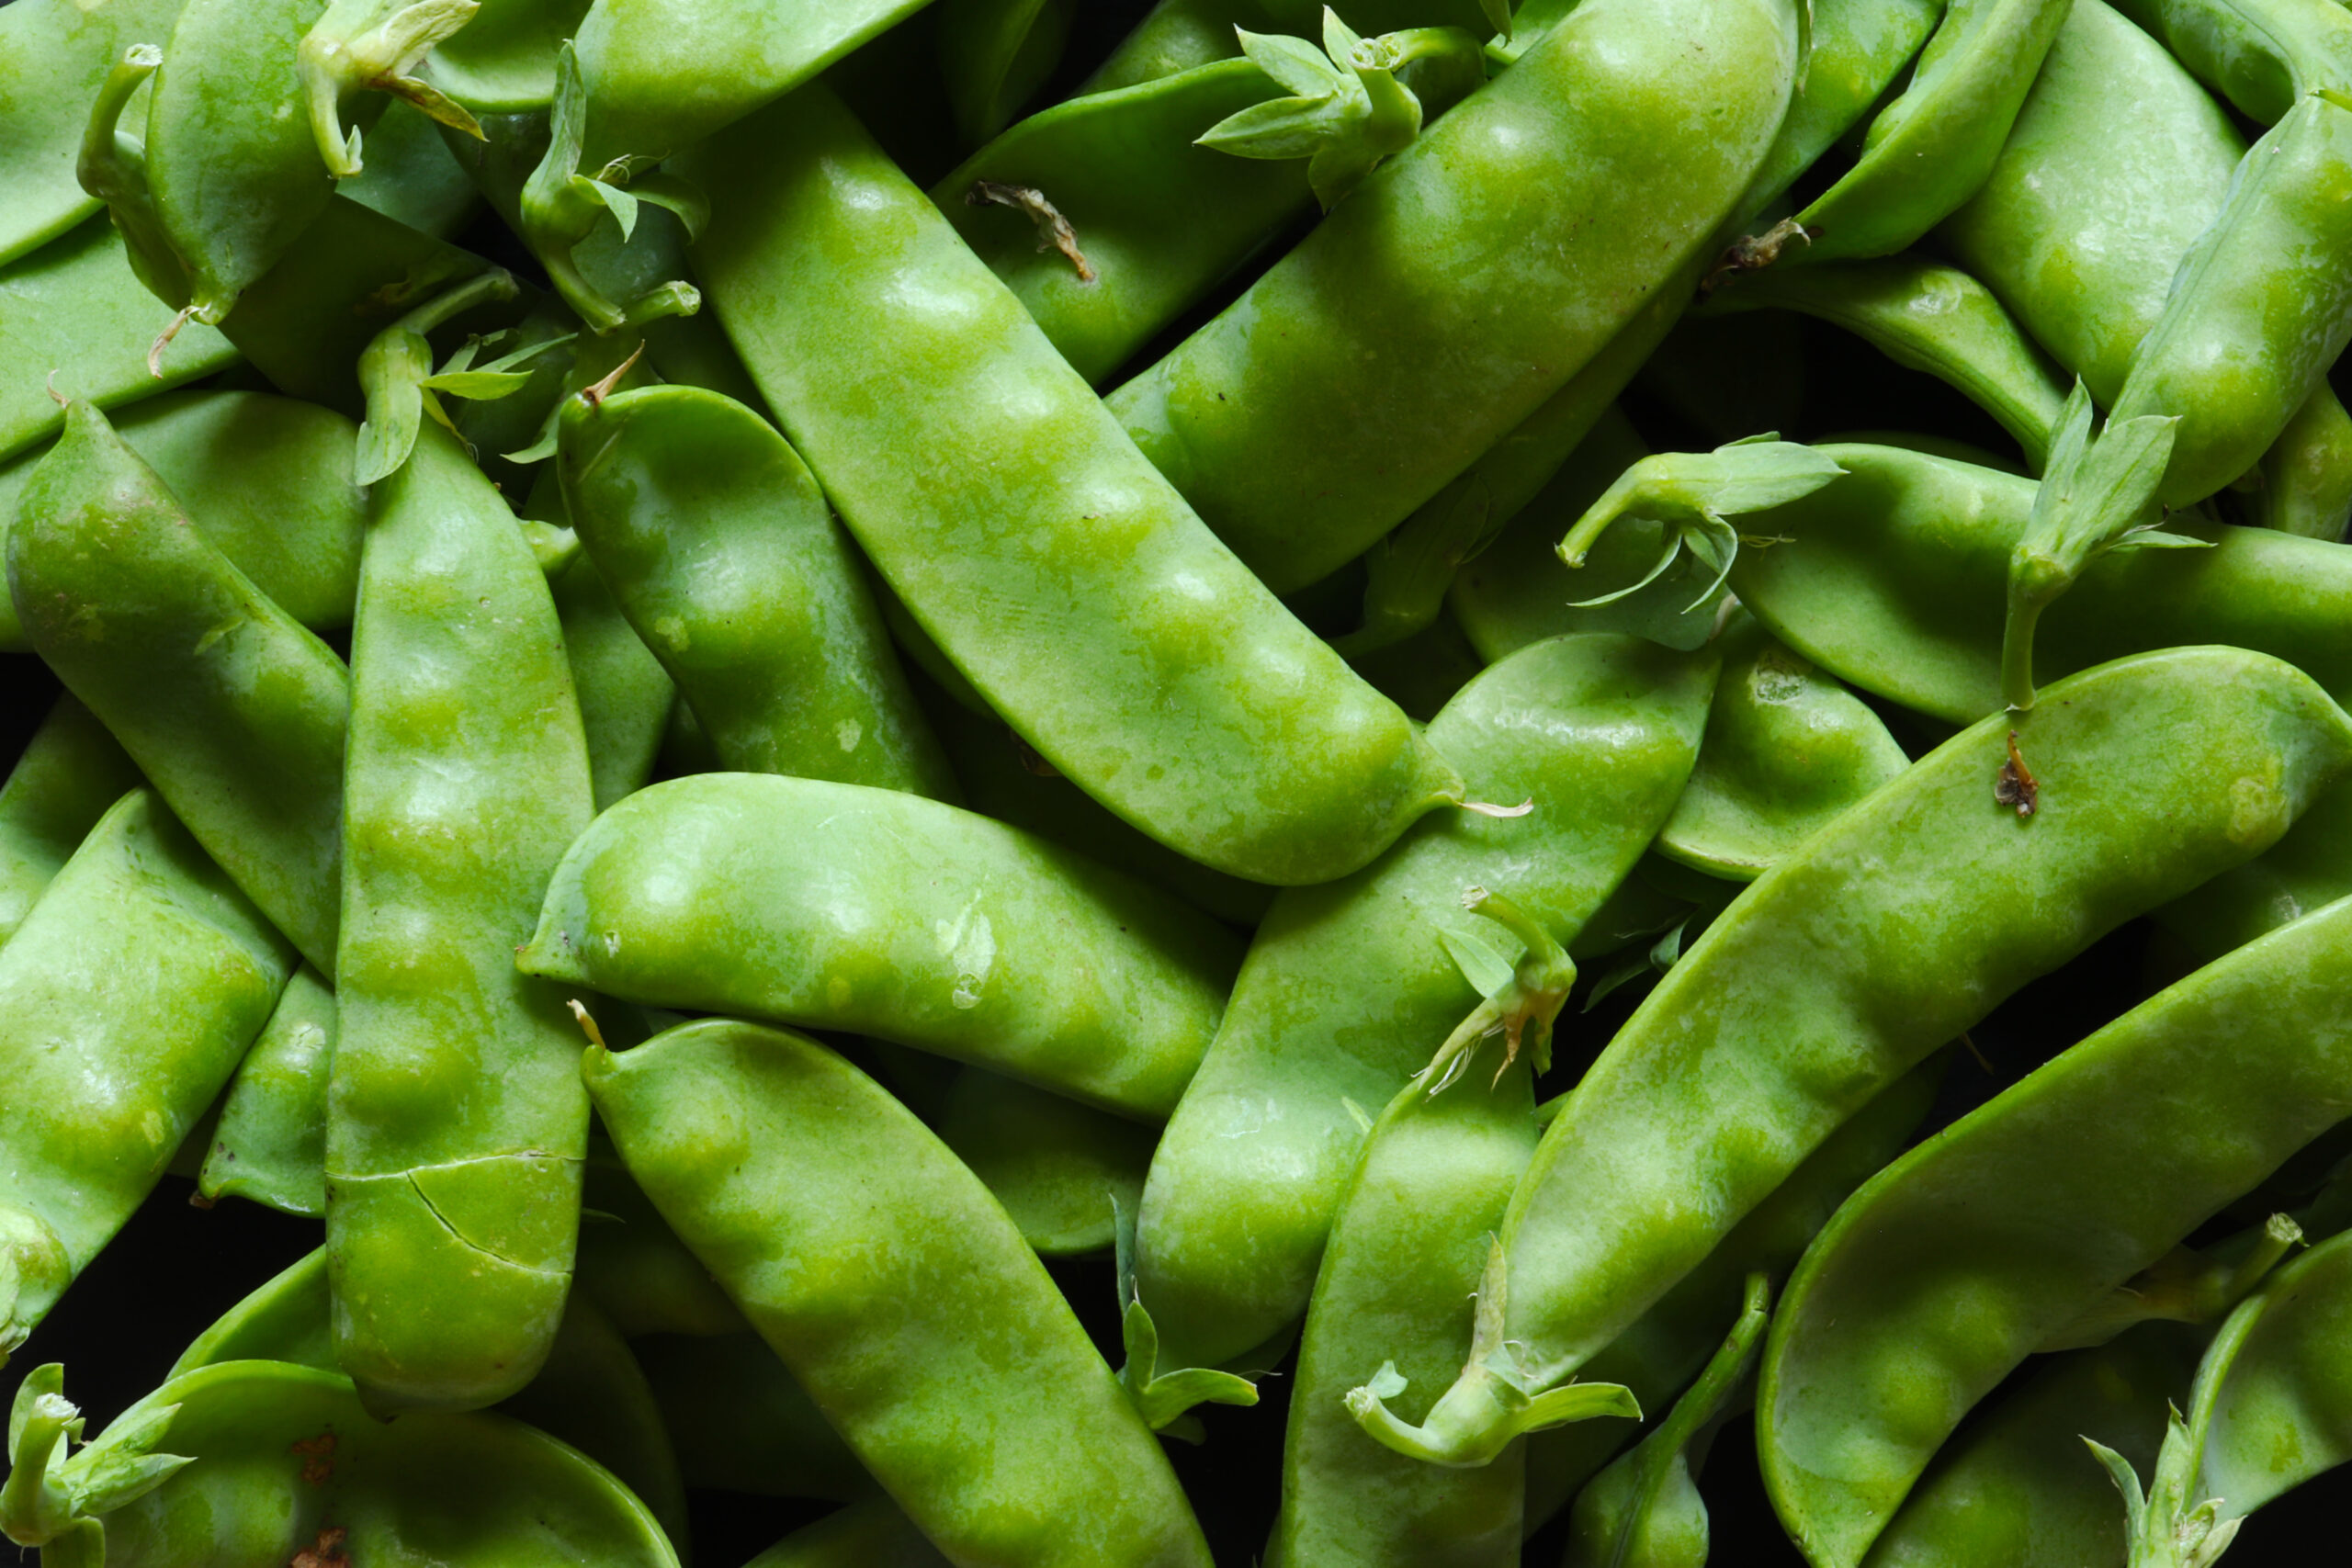 Photography of snow peas for food illustrations